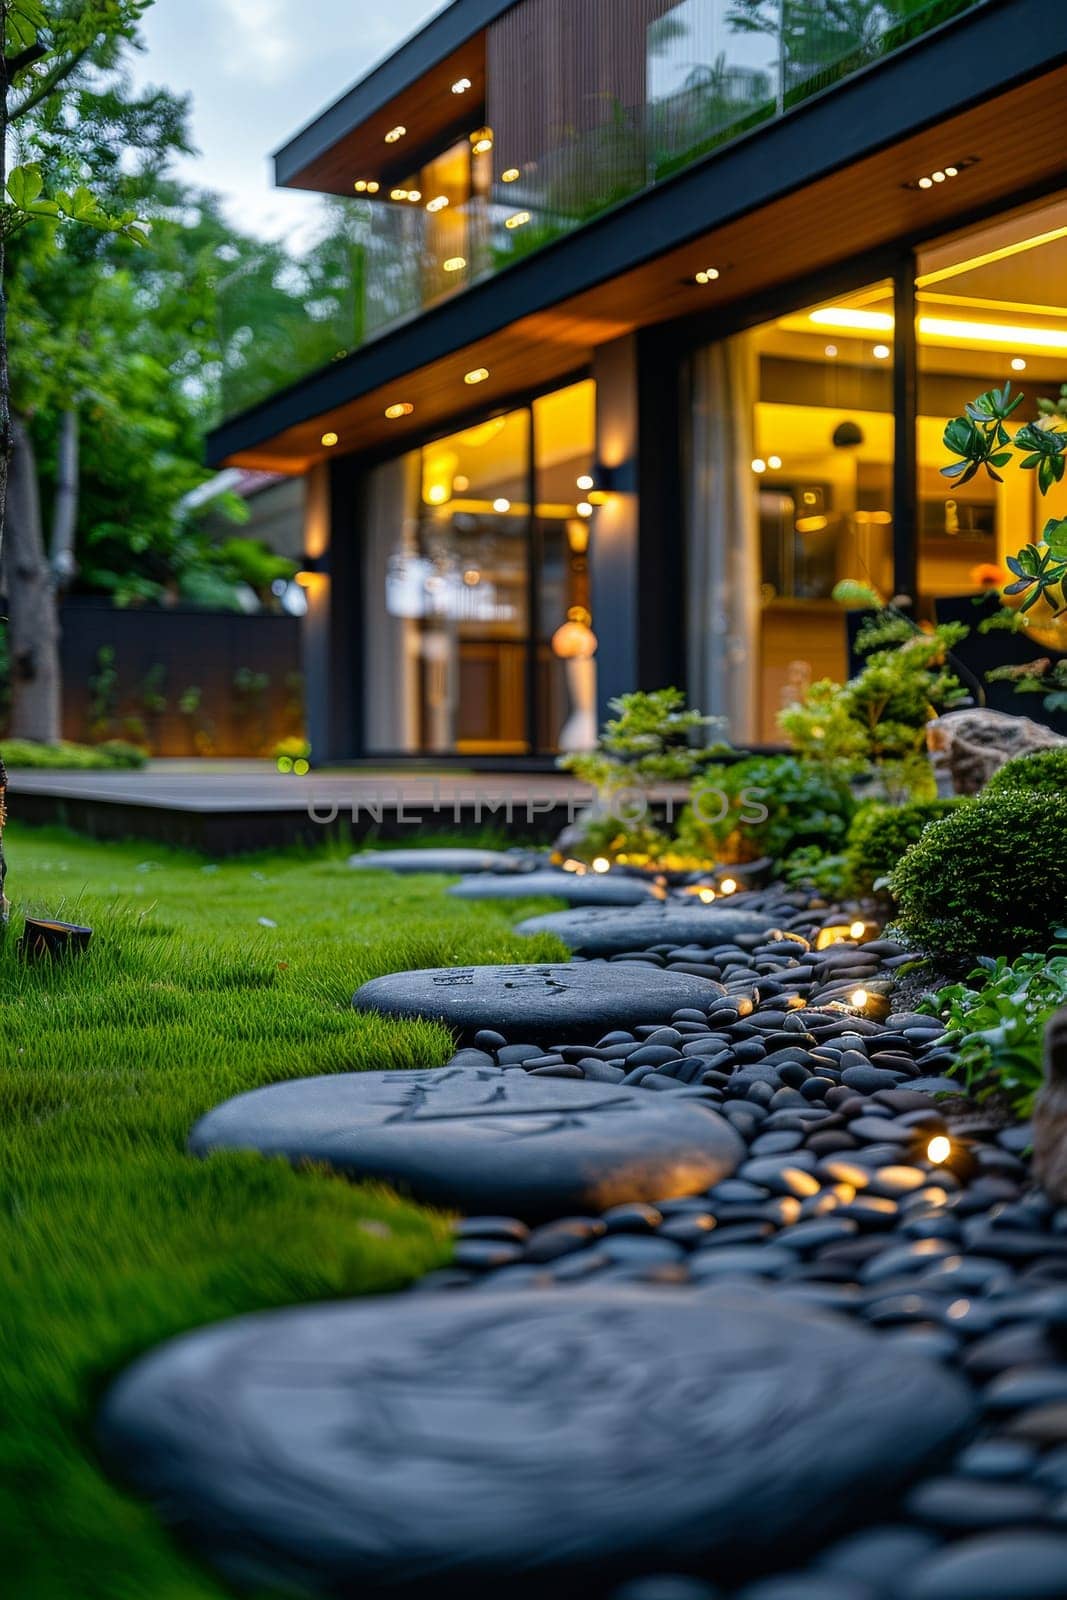 A house with a large yard and a pathway made of black rocks. The pathway is lit up at night, creating a warm and inviting atmosphere